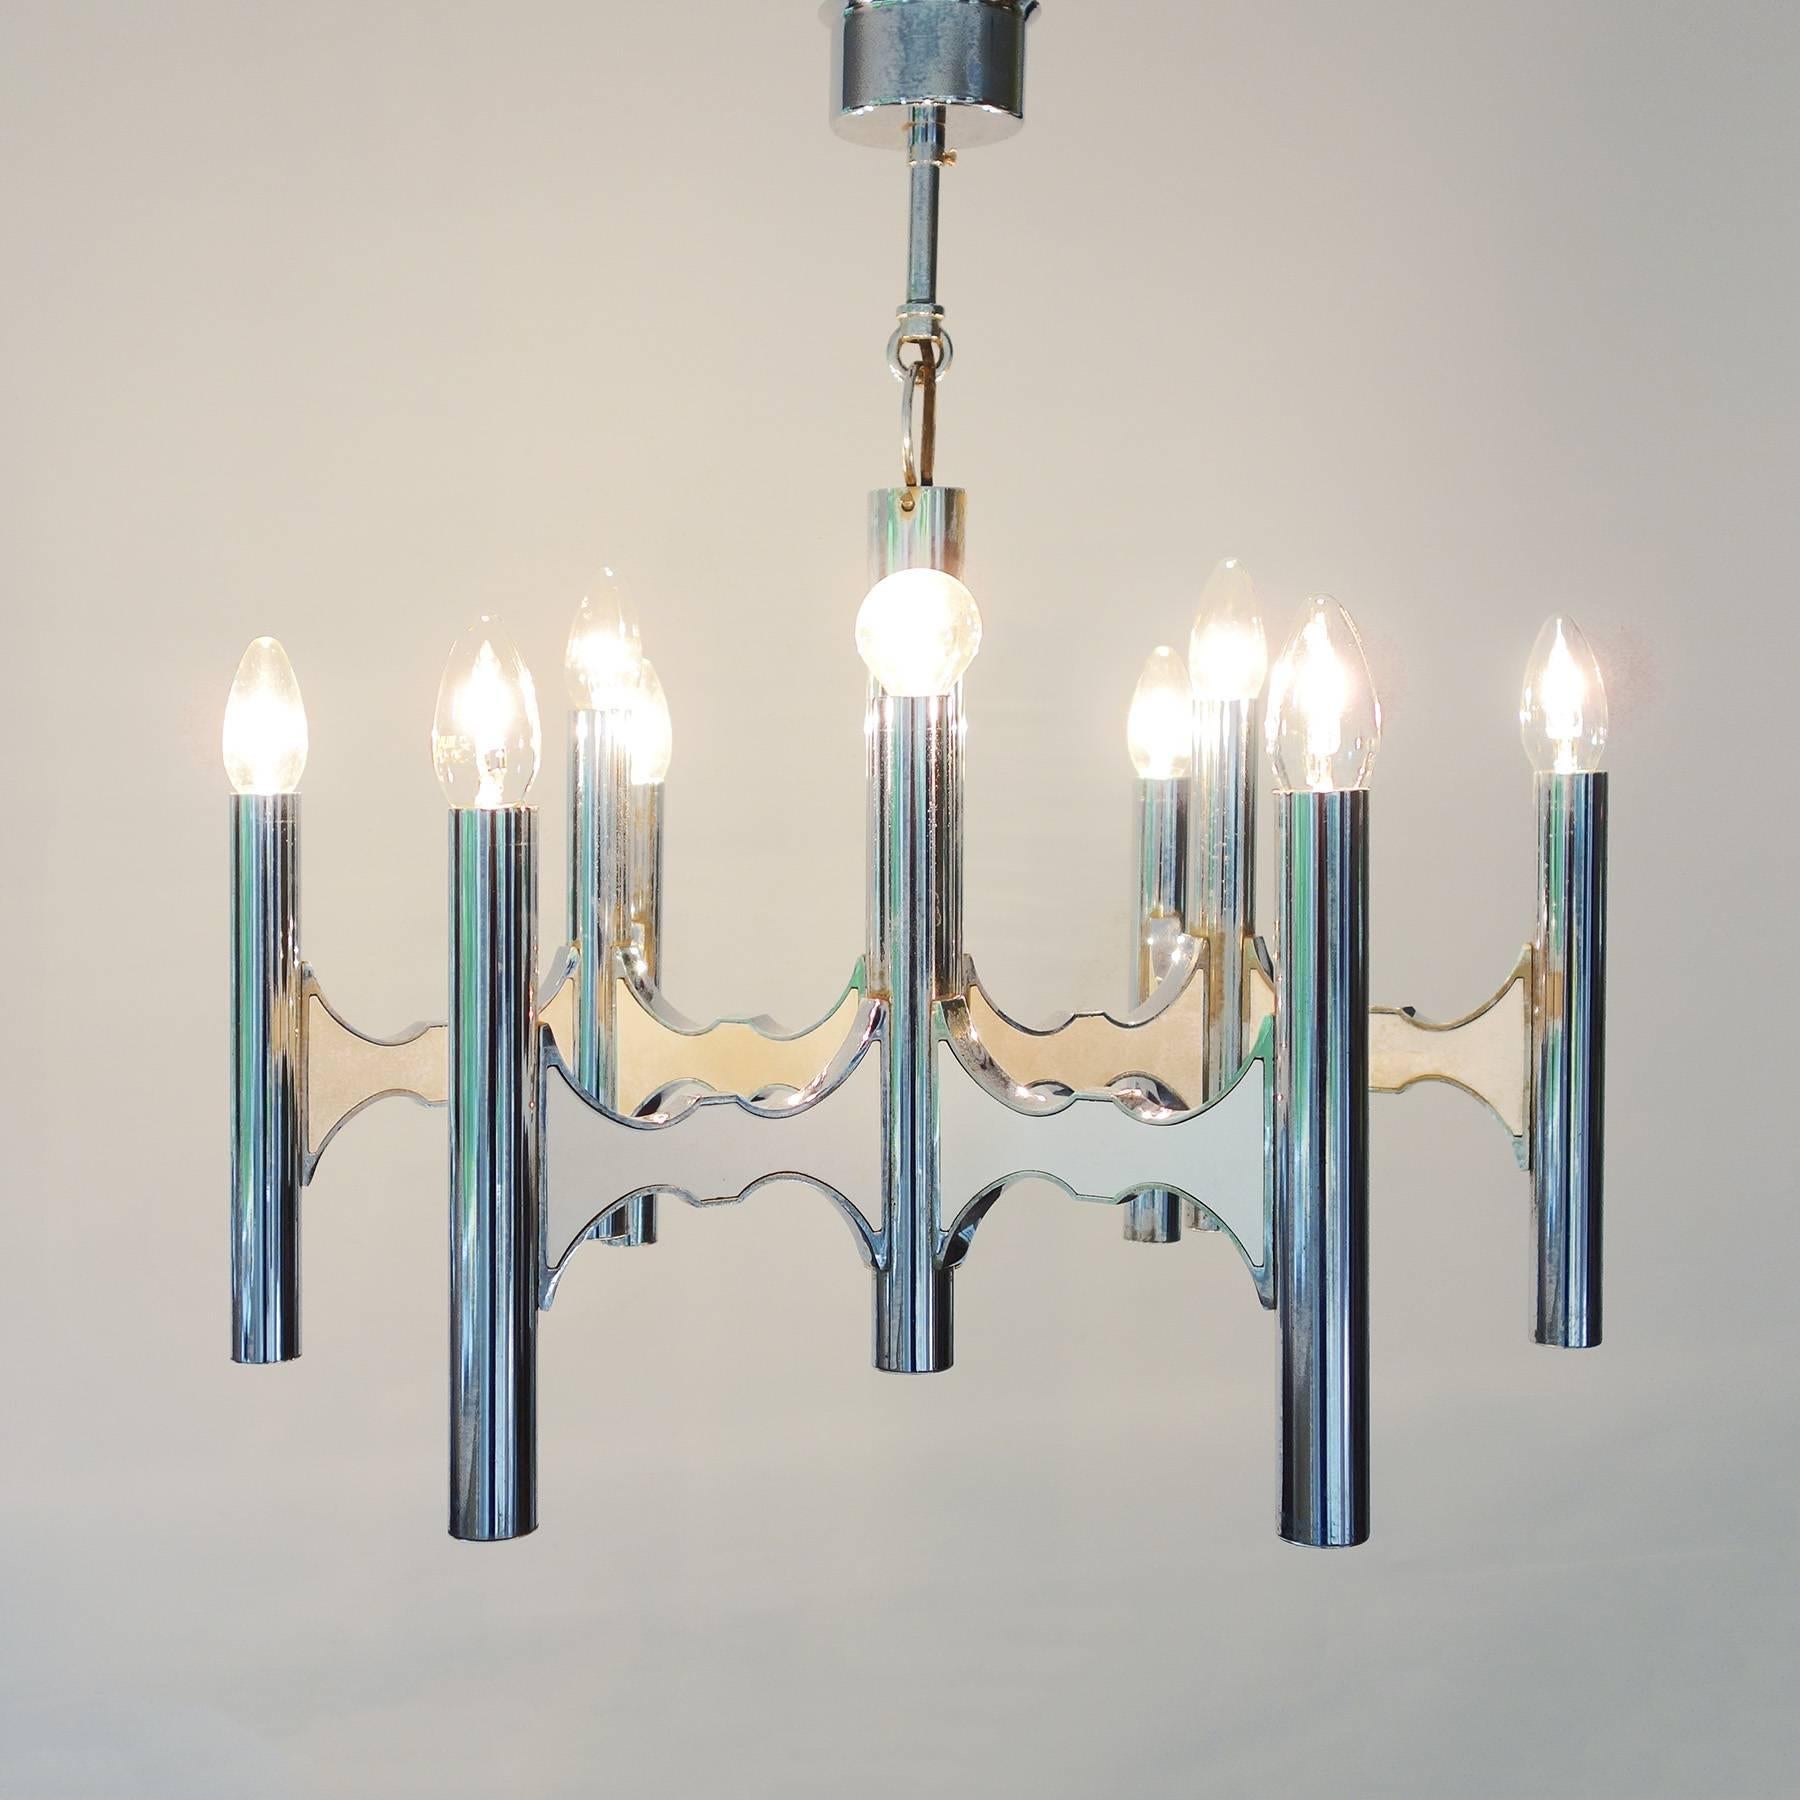 Chandelier, designed in the 1970s by Gaetano Sciolari. The lamp is made of chrome-plated steel. It is in a very cool and fully working condition.